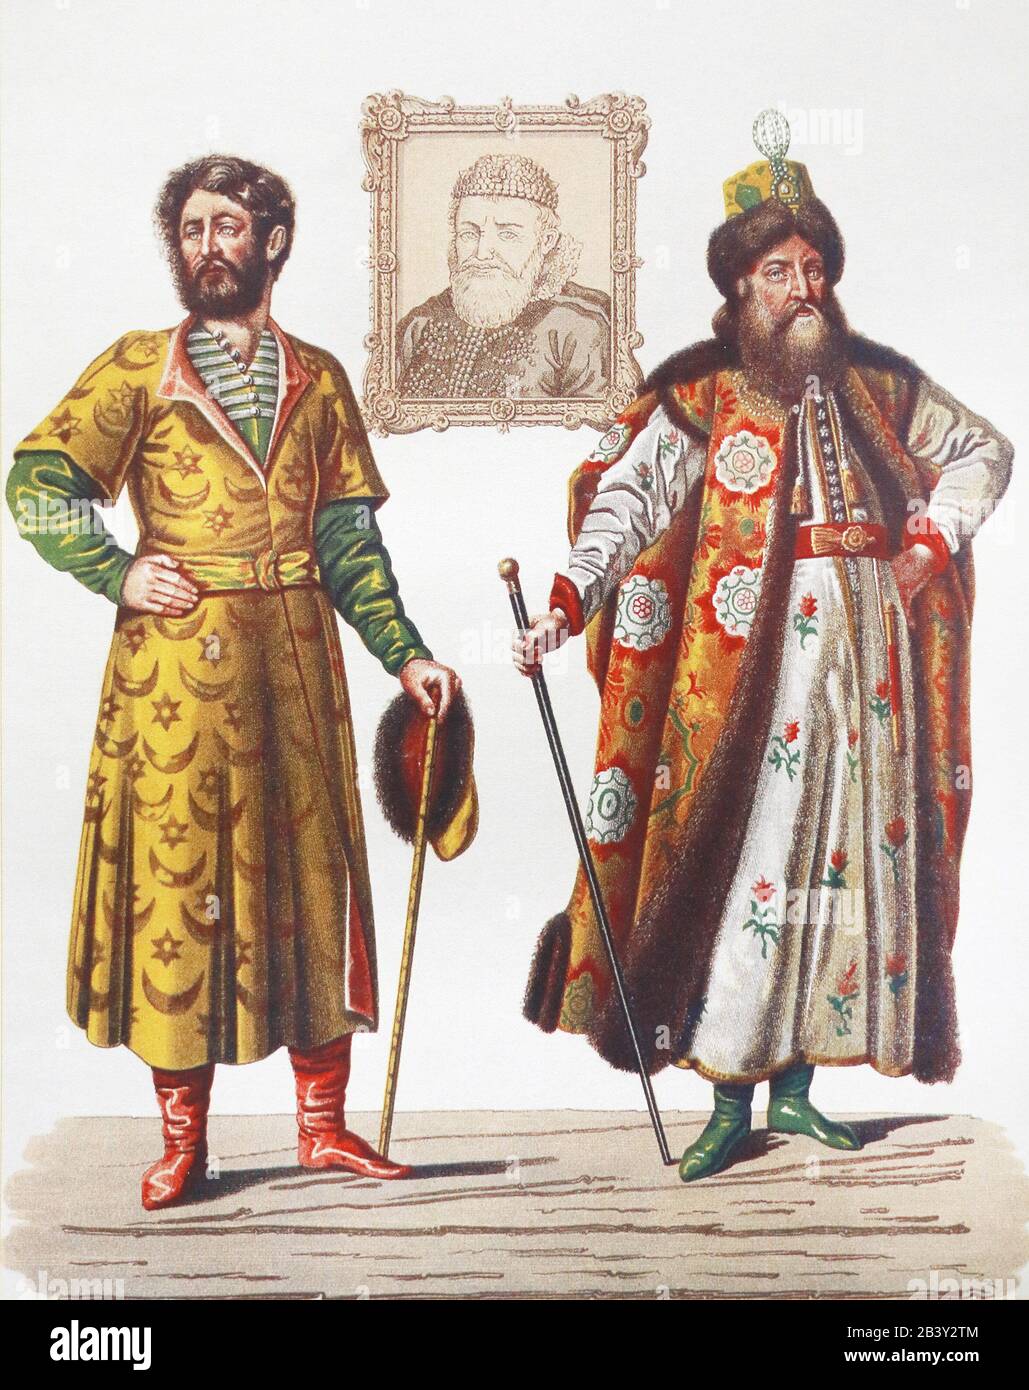 Clothing of Russian boyars of the 16-17th centuries. Painting by F. Solntsev, 19th century. Stock Photo